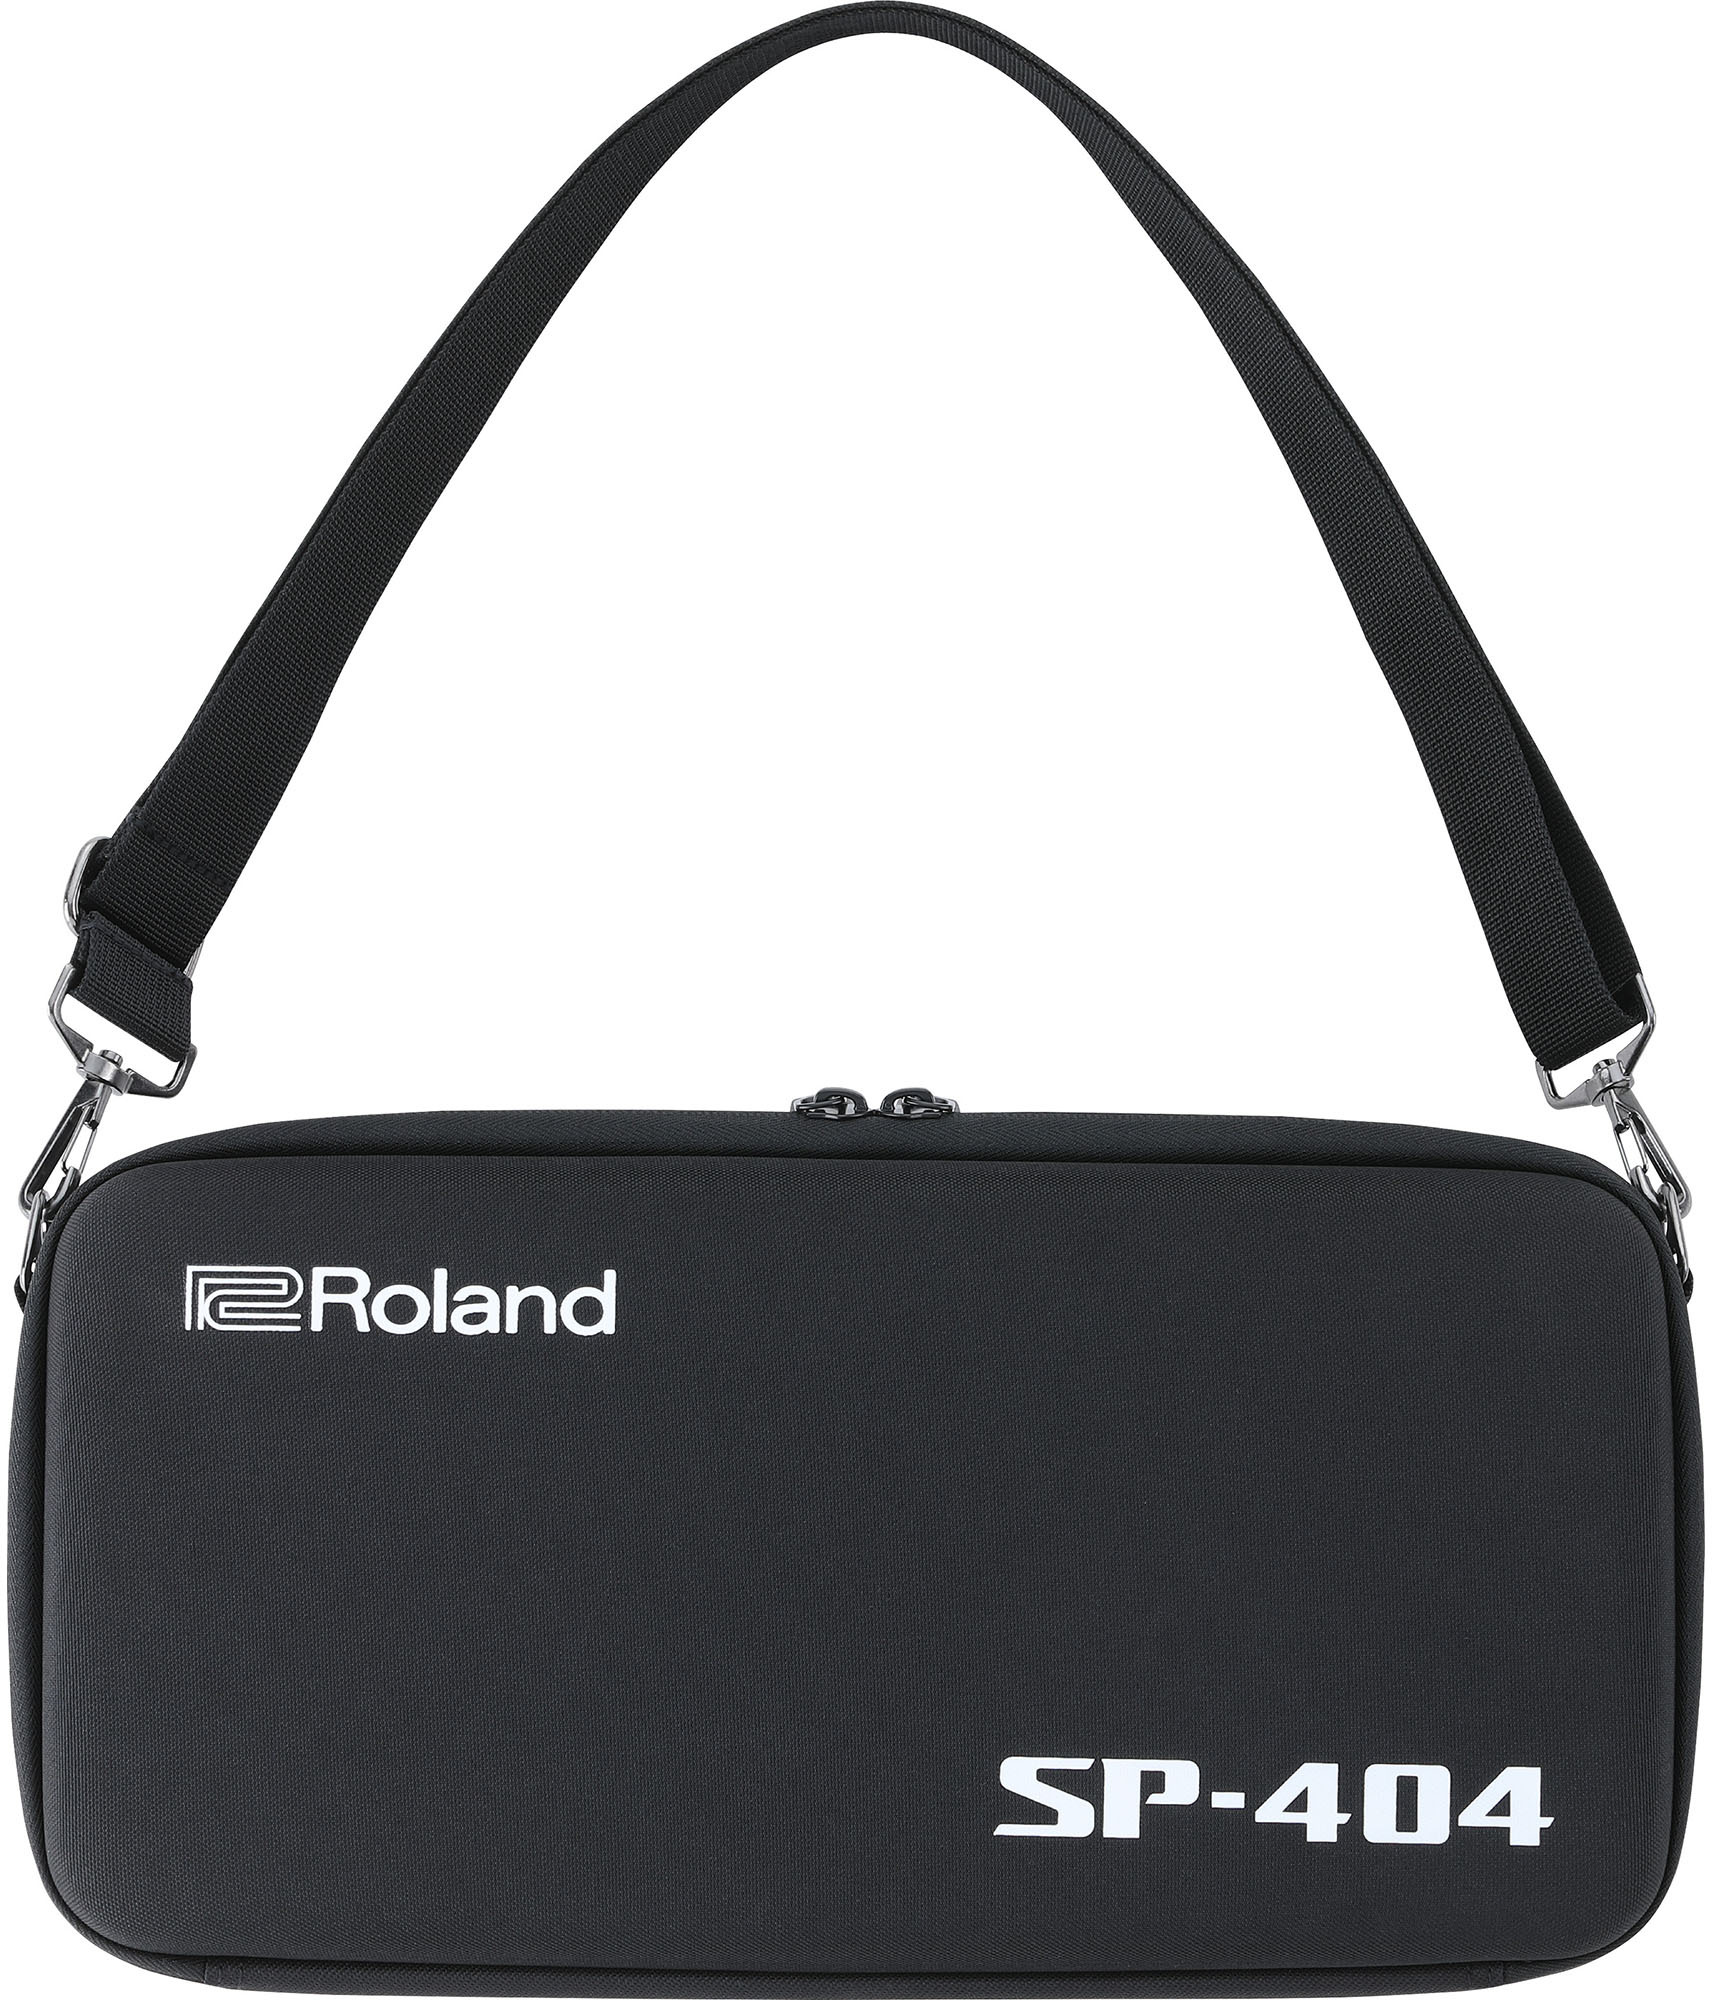 Roland Cb-404 - Gigbag for studio product - Main picture